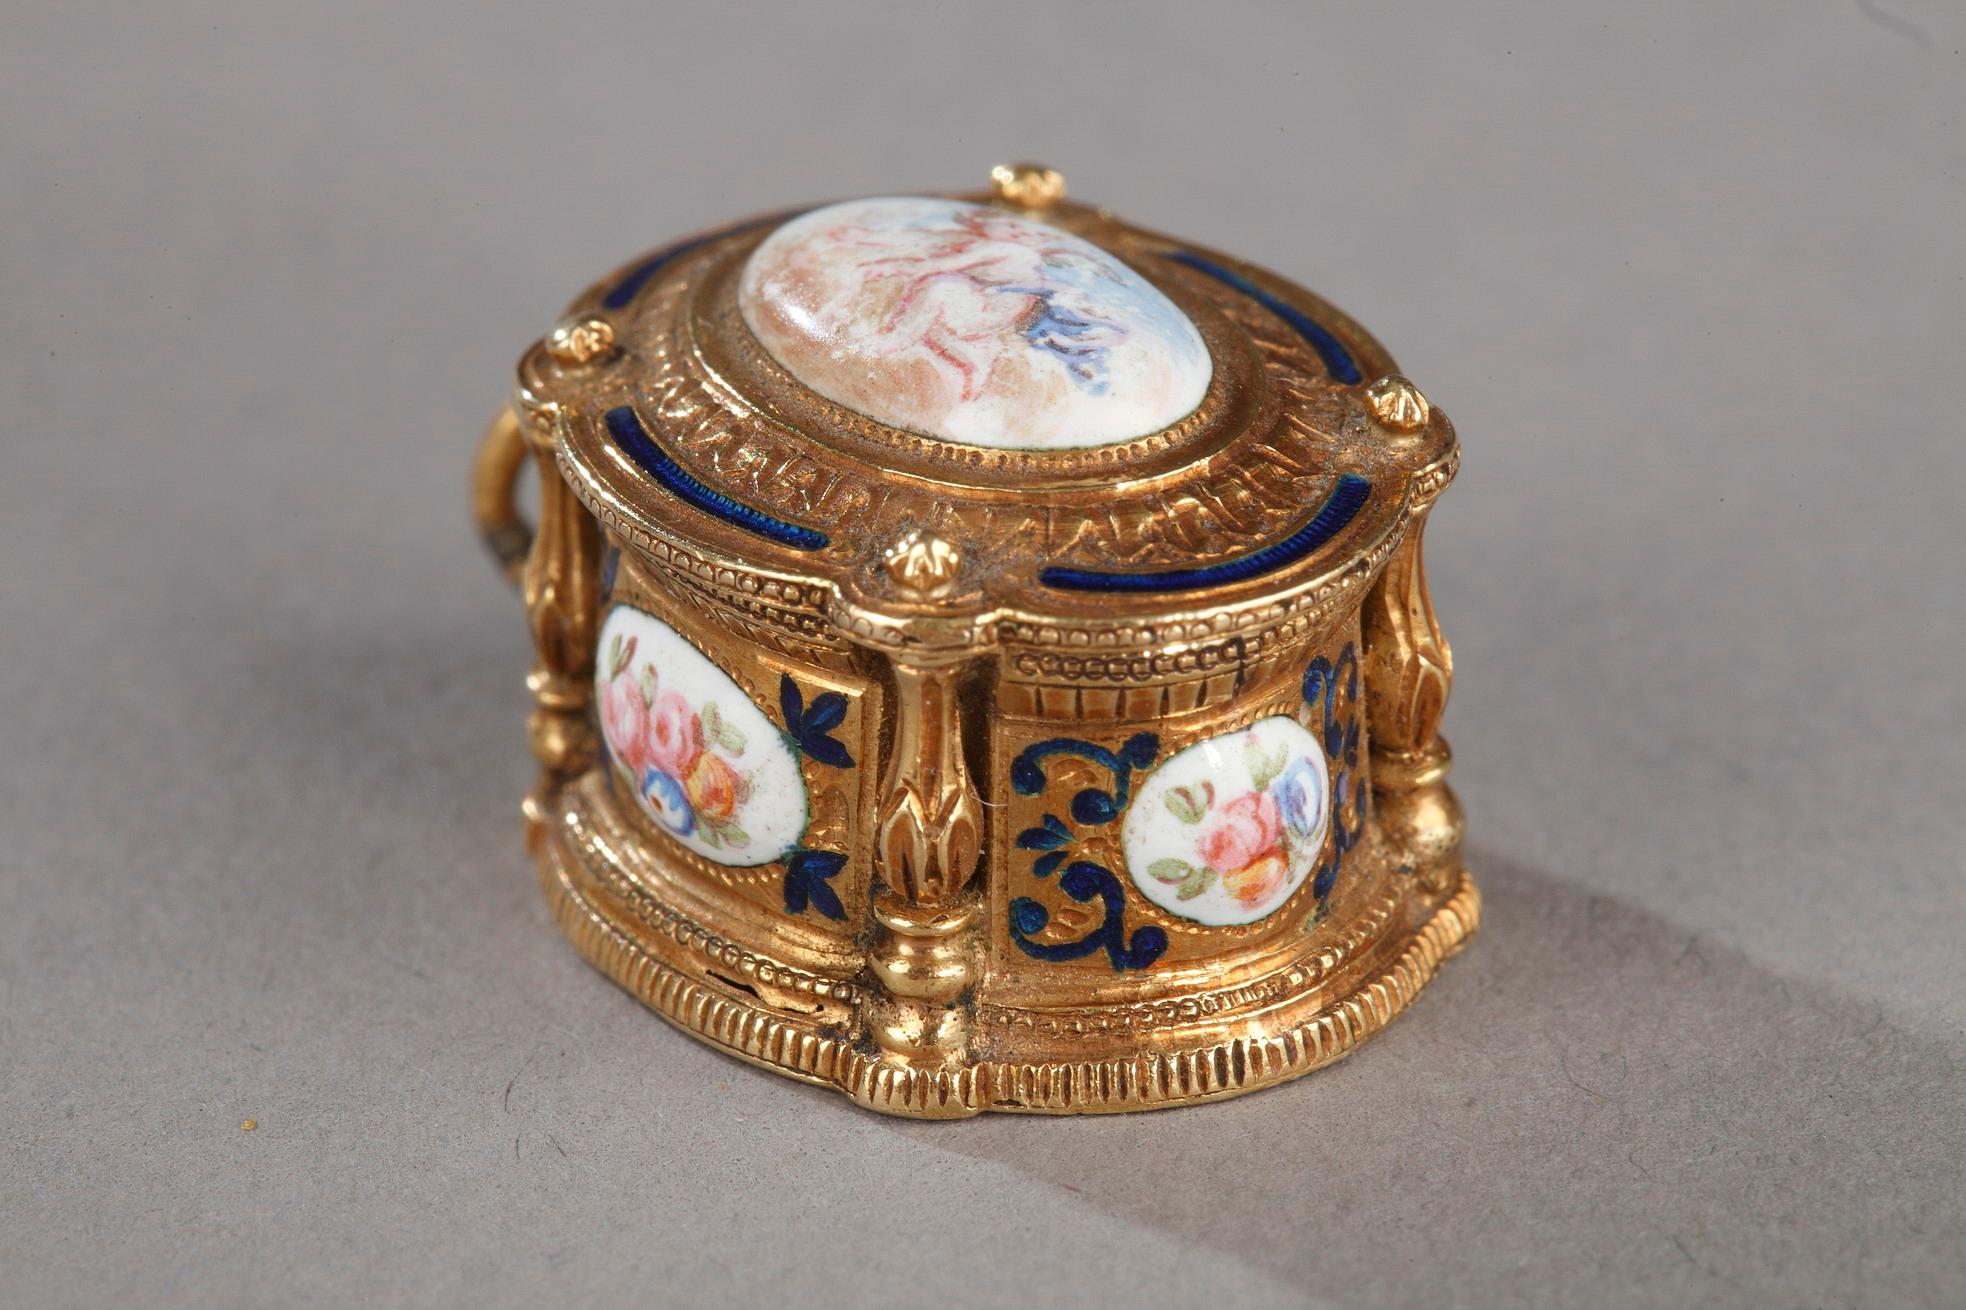 Small little box of oval shape mounted as a pendant. The hinged lid and the side are adorned with enamelled medallions representing putti or floral arrangements. The medallions are framed by translucent blue enamelled motifs and a fine engraving. On